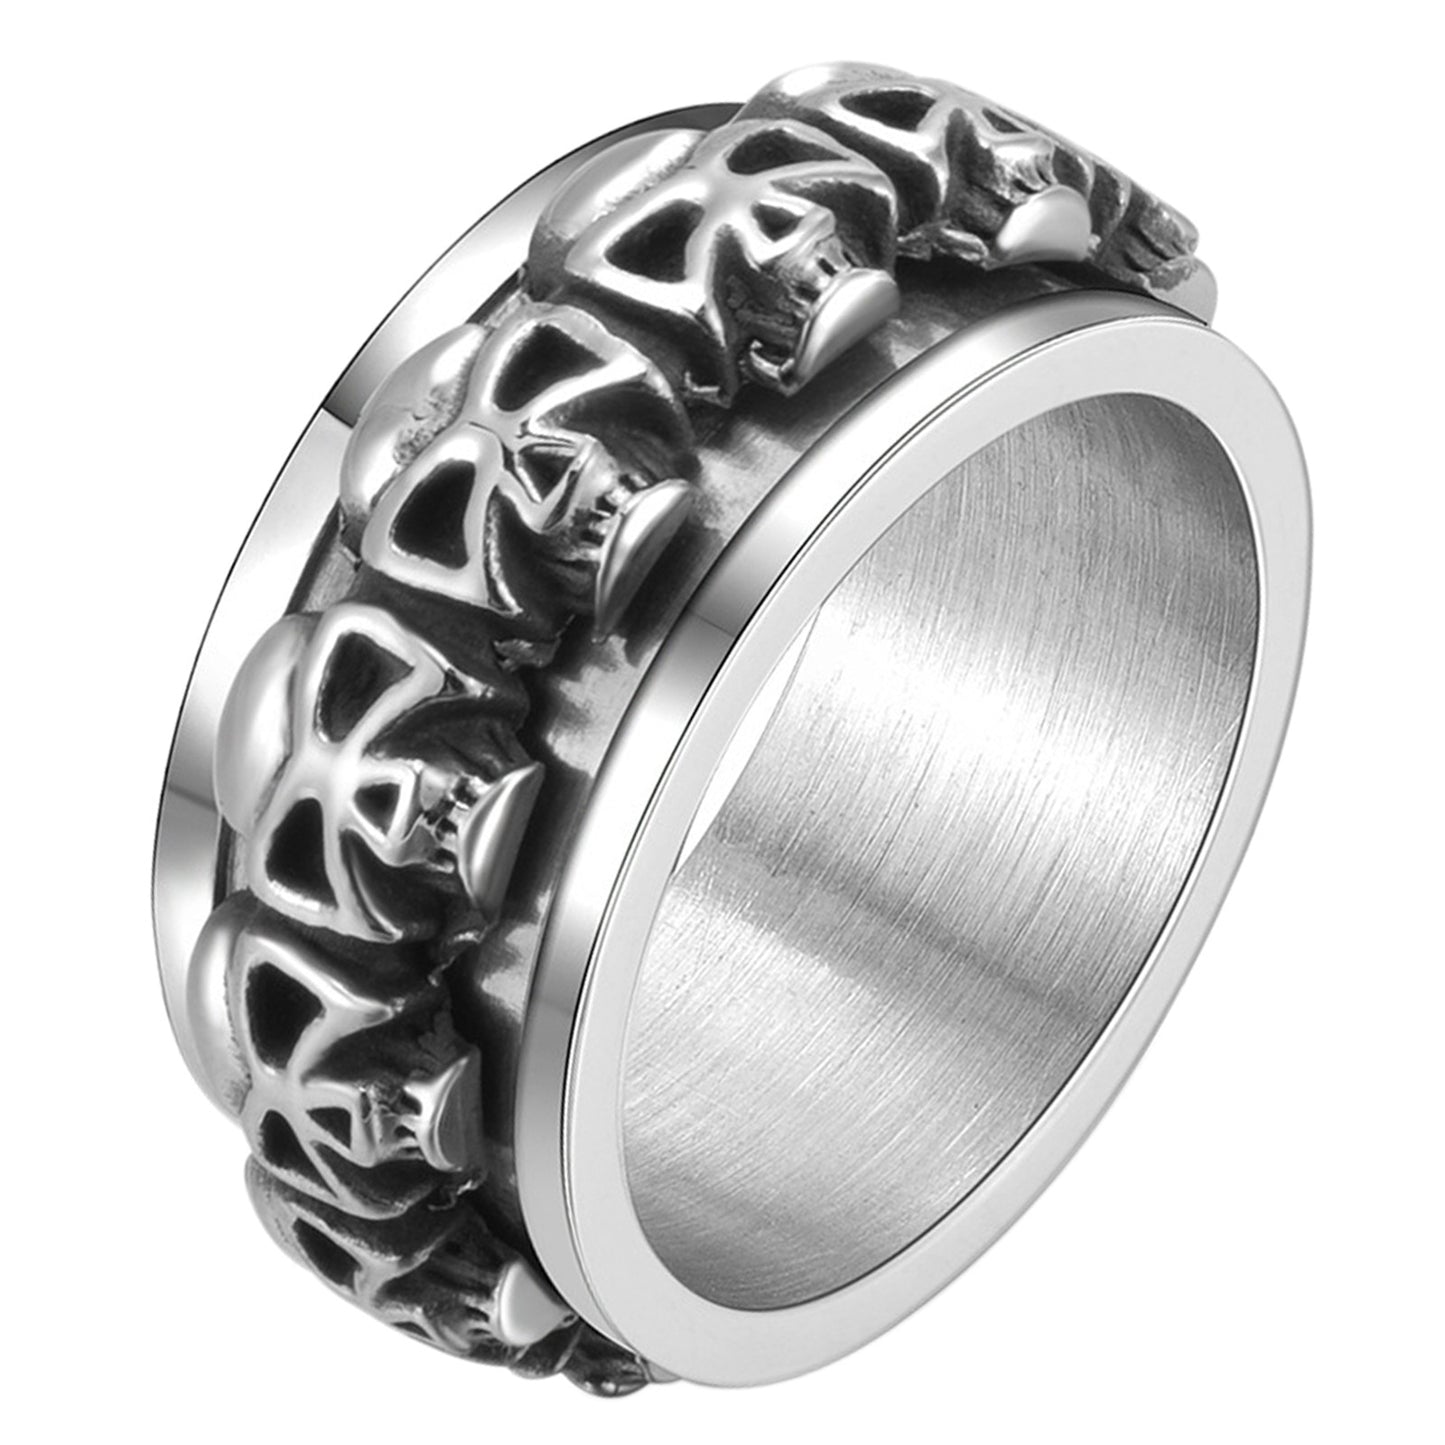 Stainless Steel Skull Ring For Men / Punk Rock Jewelry